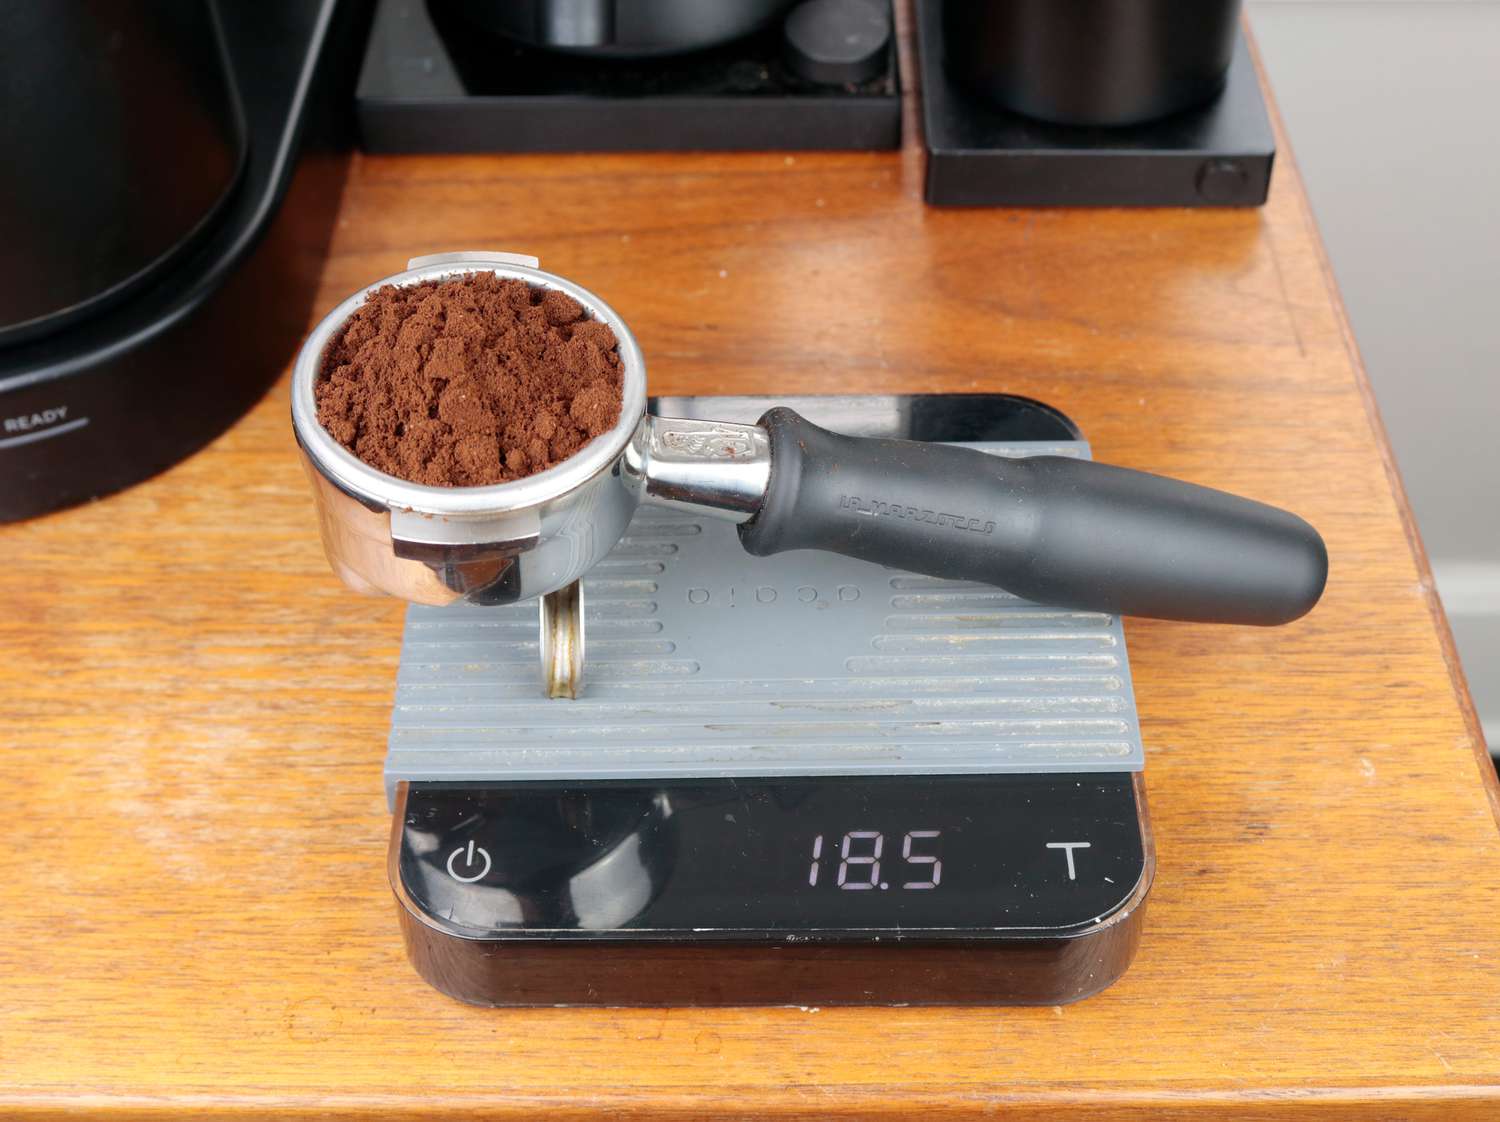 a portafilter on a scale with coffee in the basket